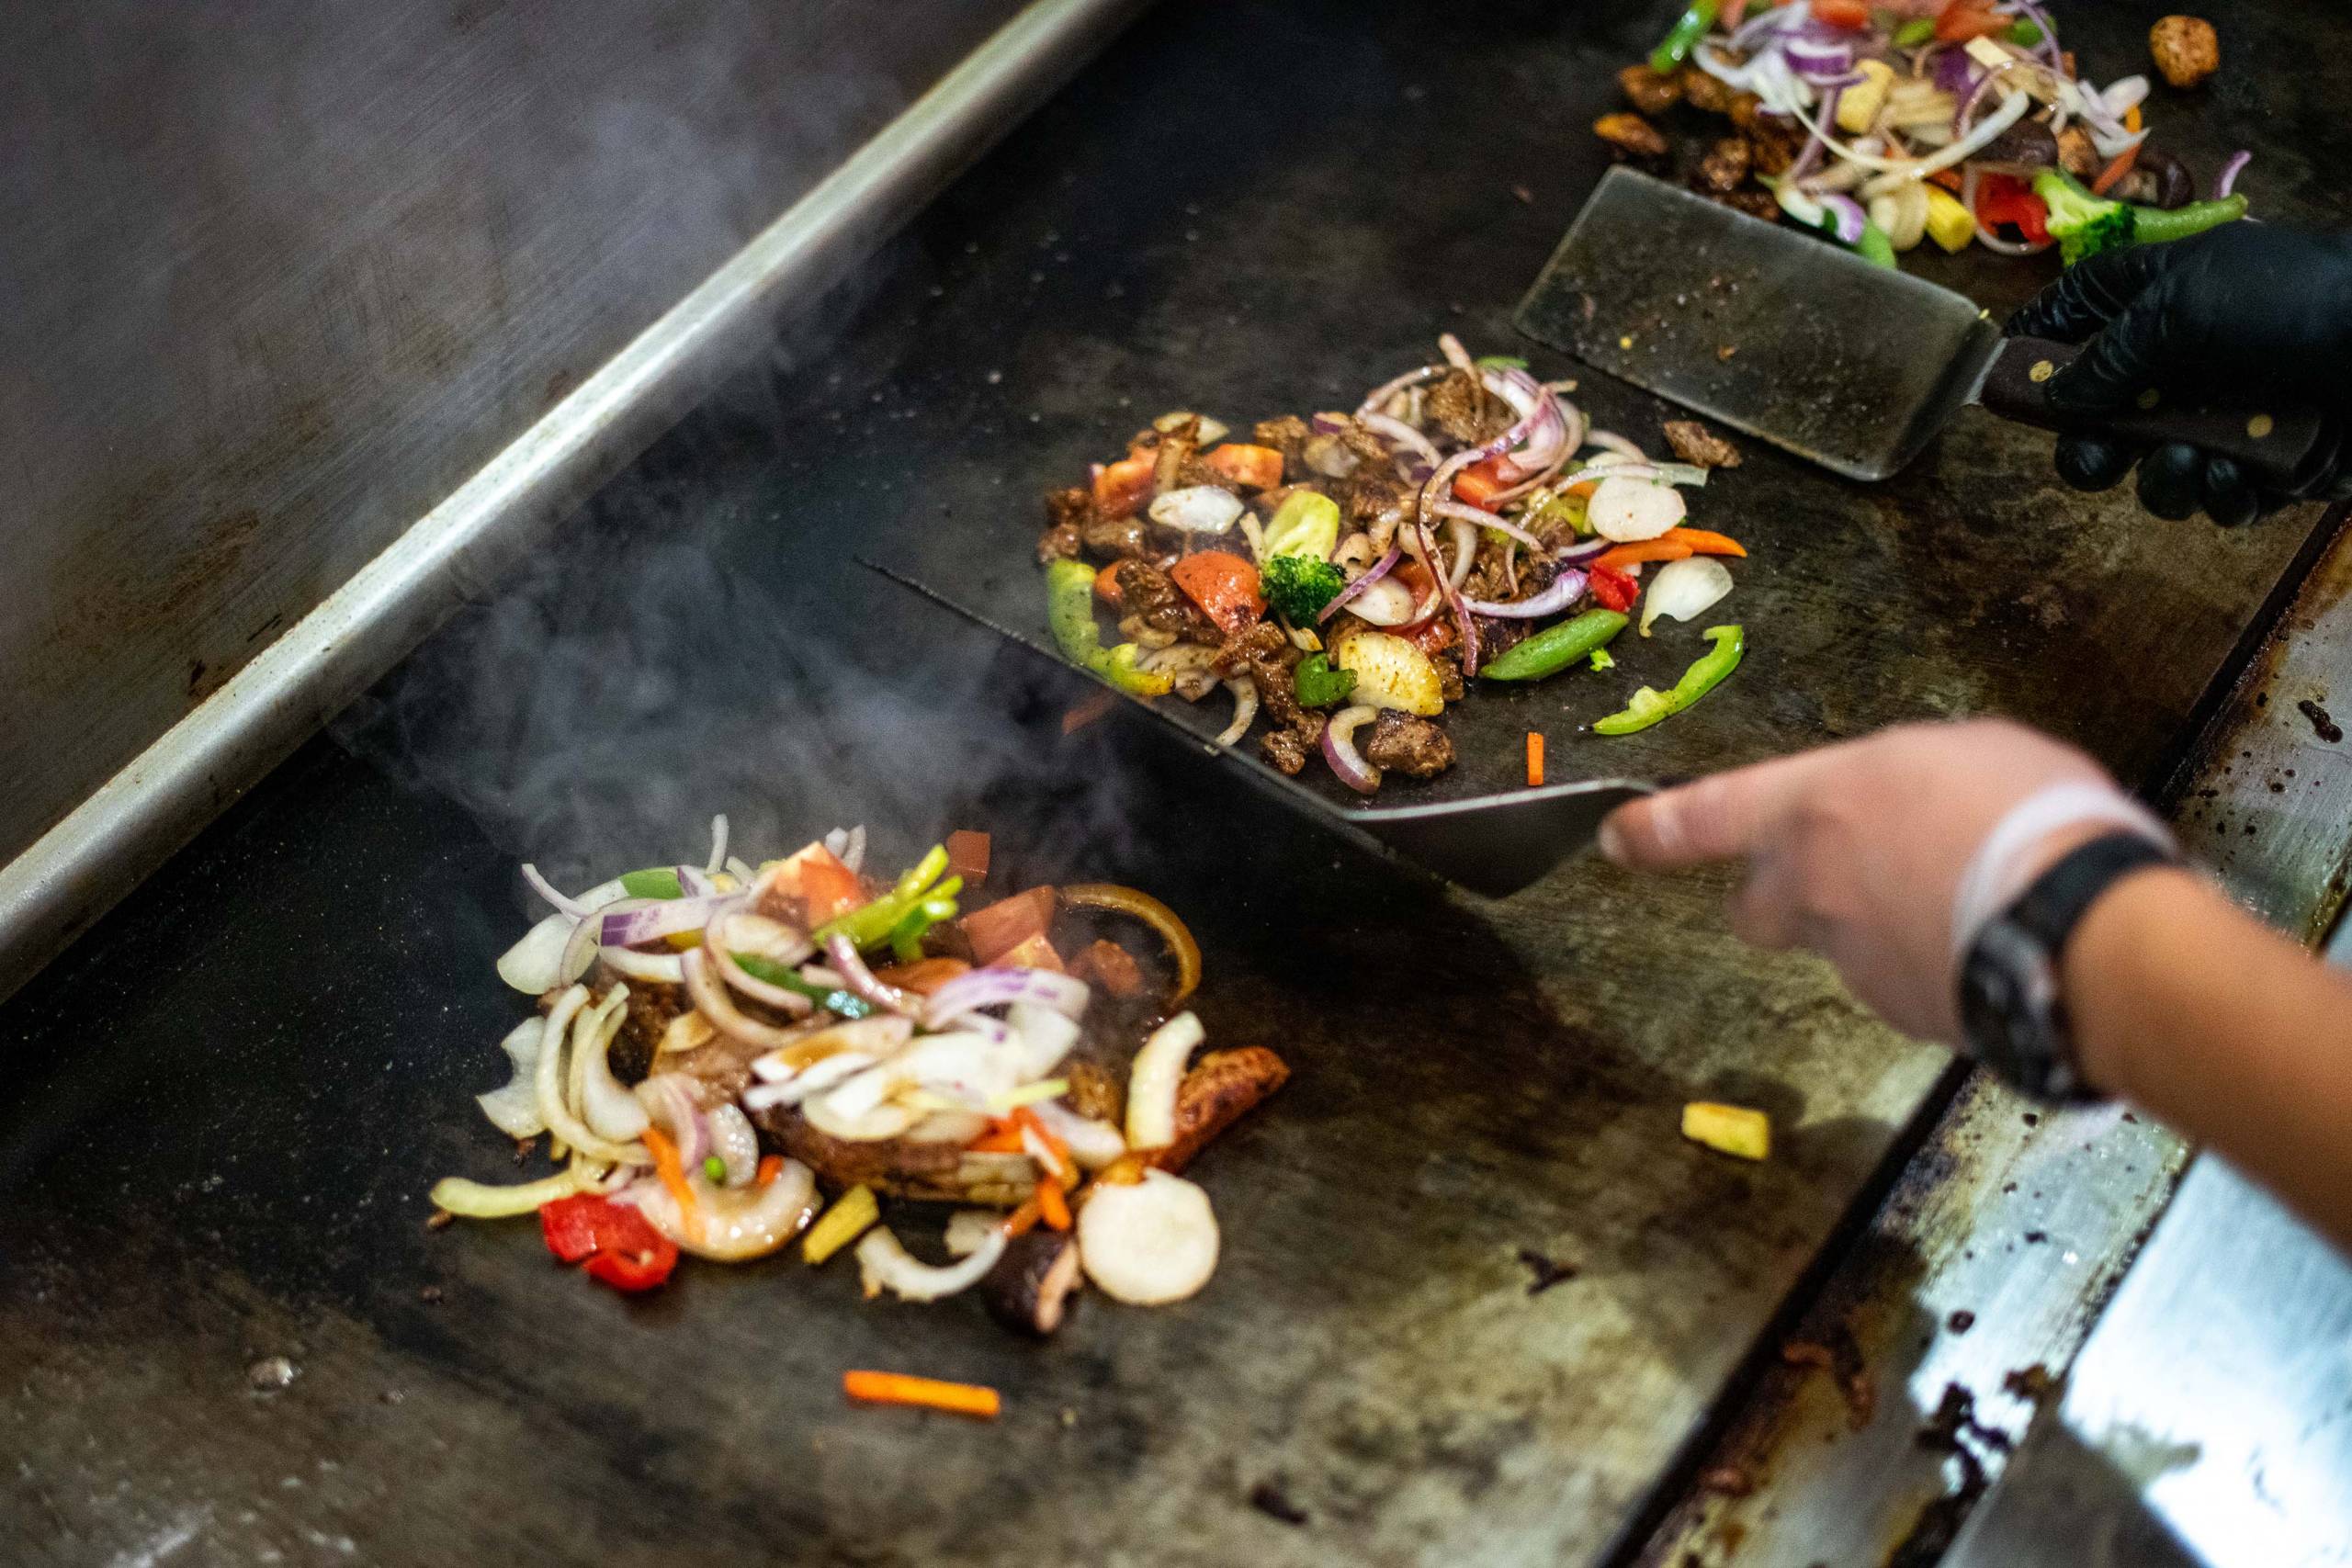 Meat and vegetables sizzling on a hot flat-top grill.